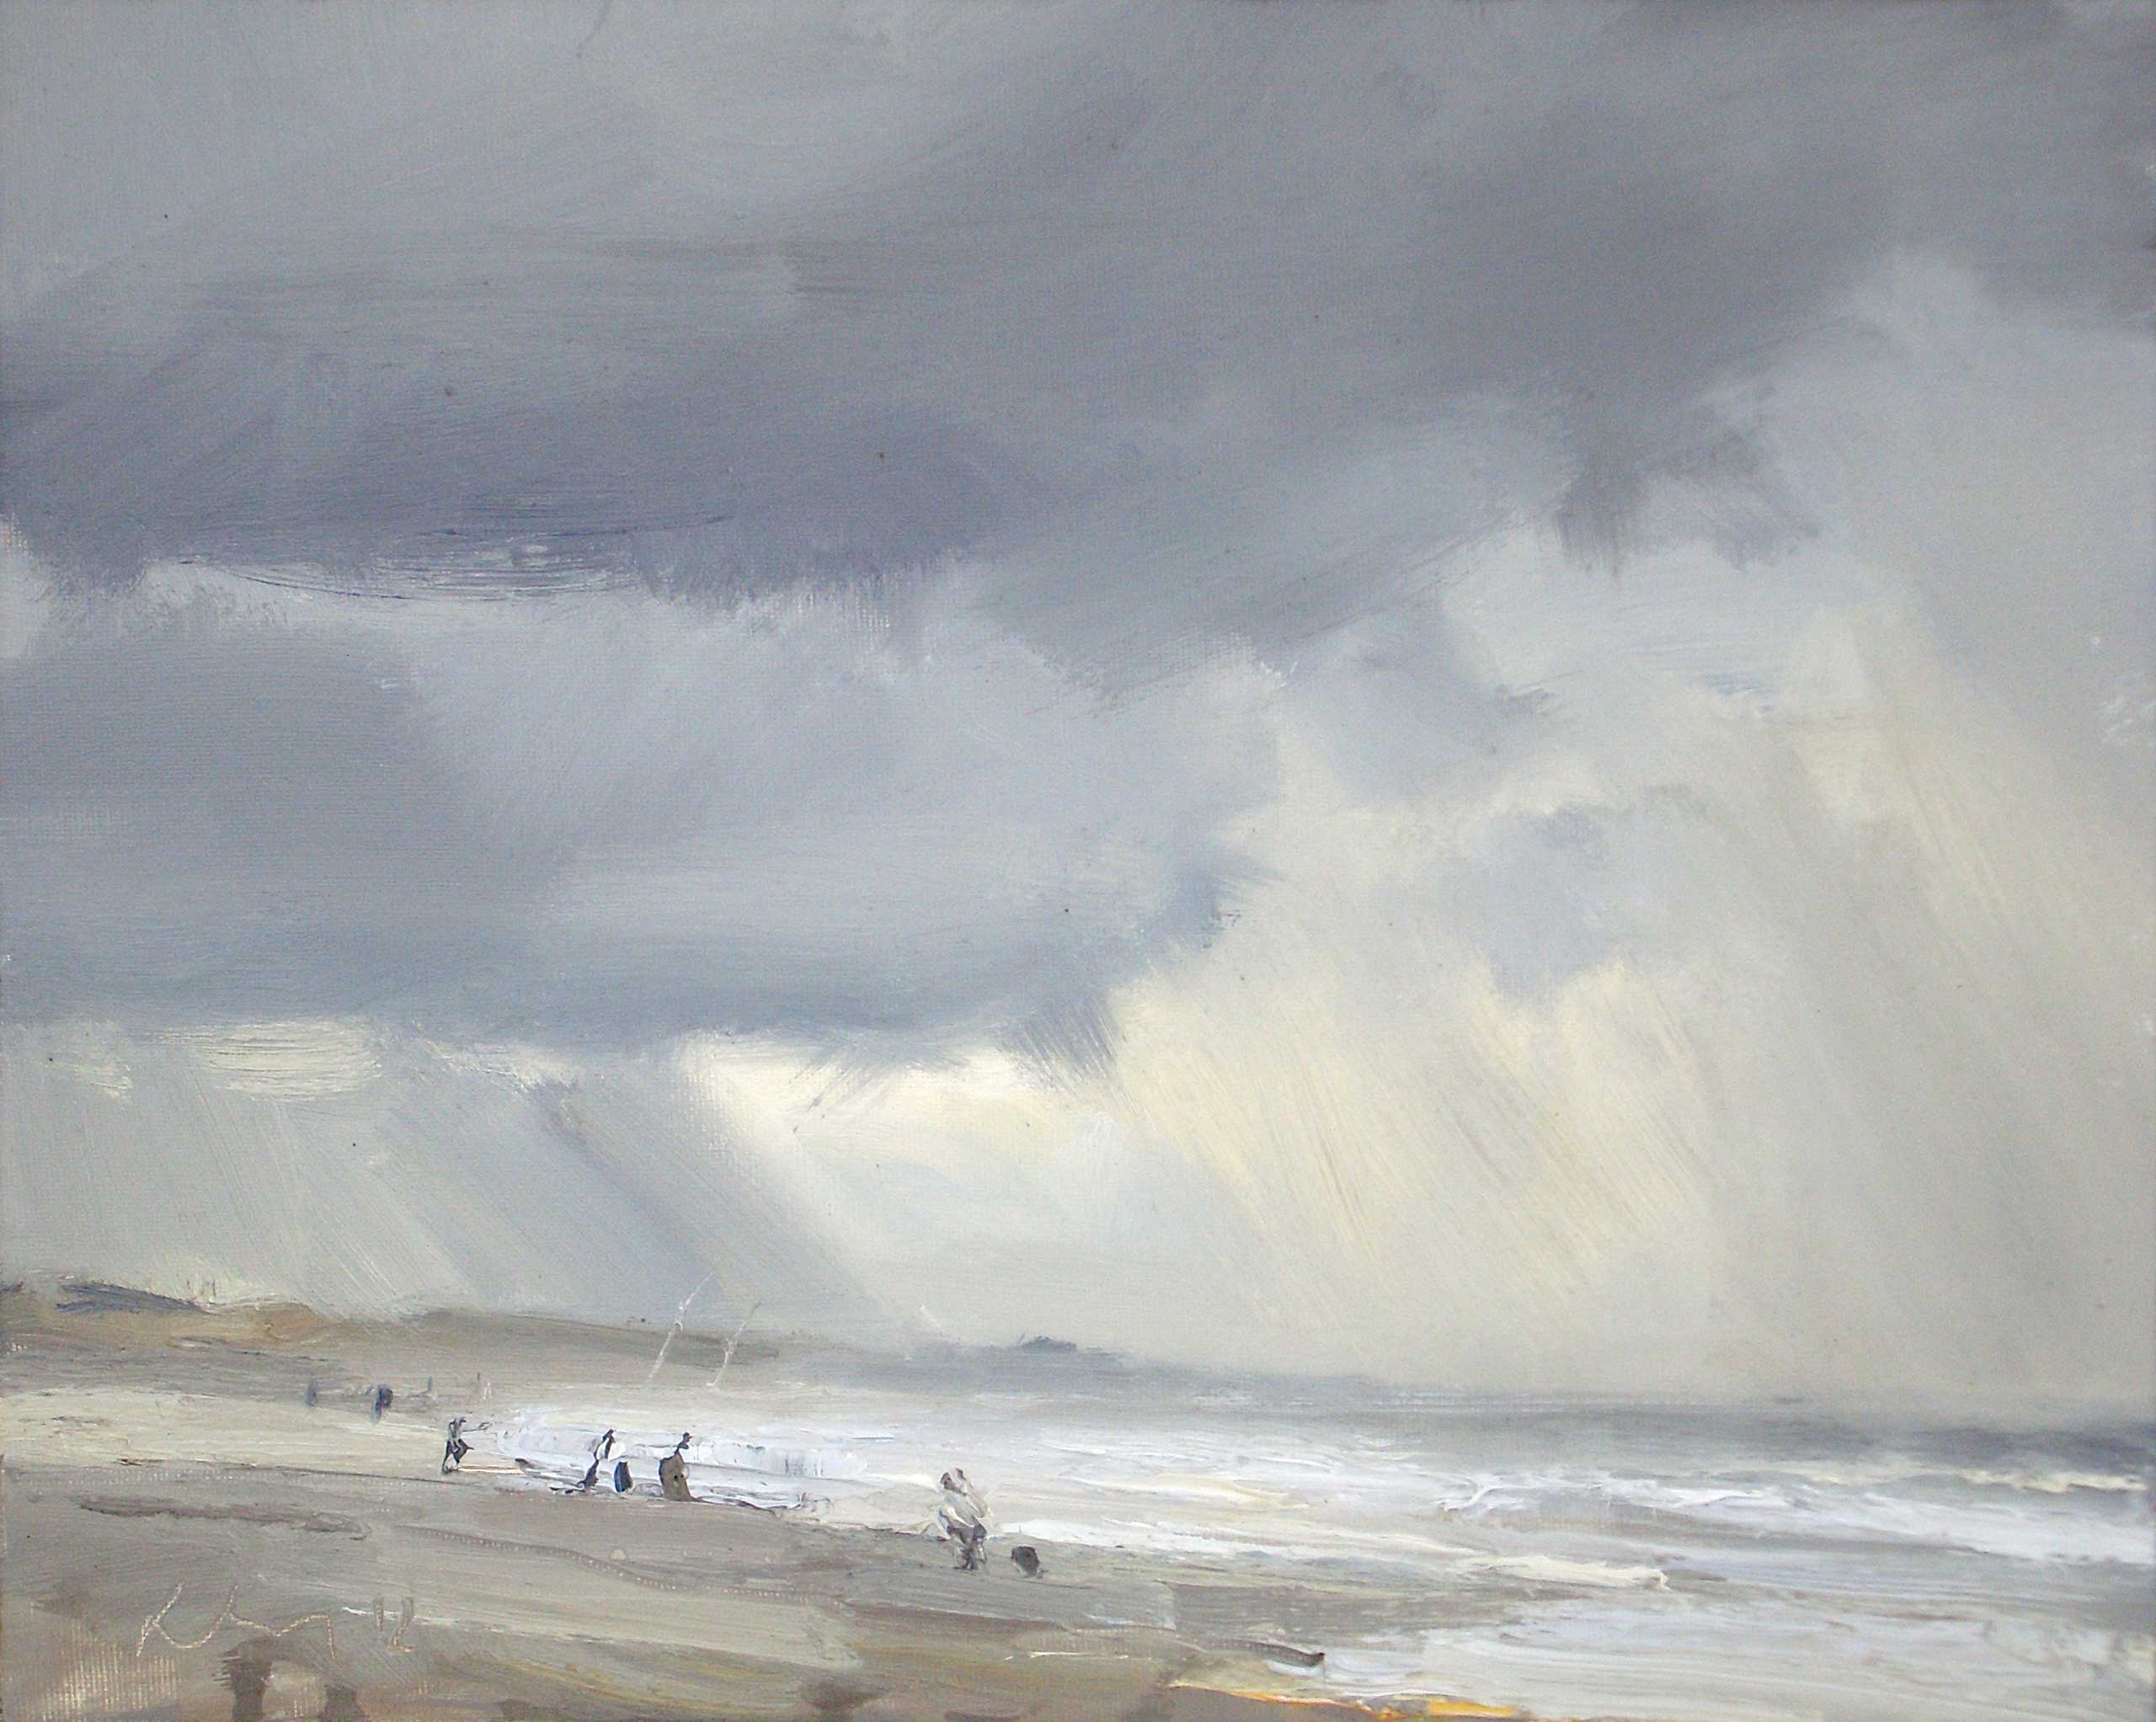 Roos Schuring, "Winter Seascape #13," 24 x 30 cm, Oil on canvas panel